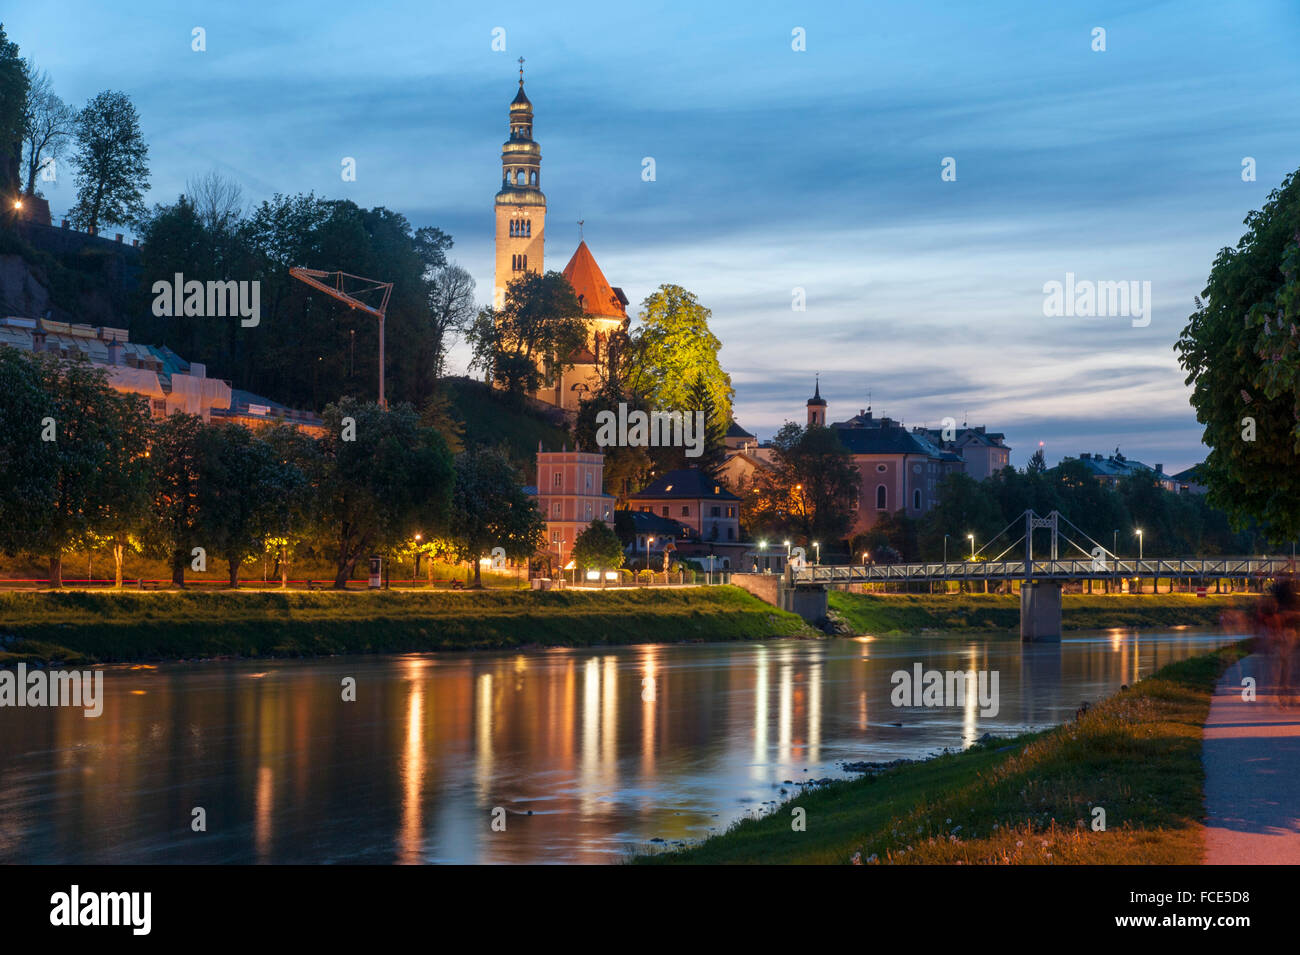 Müllner church at dusk, the historic center of the city of Salzburg, a UNESCO World Heritage Site, Austria Stock Photo